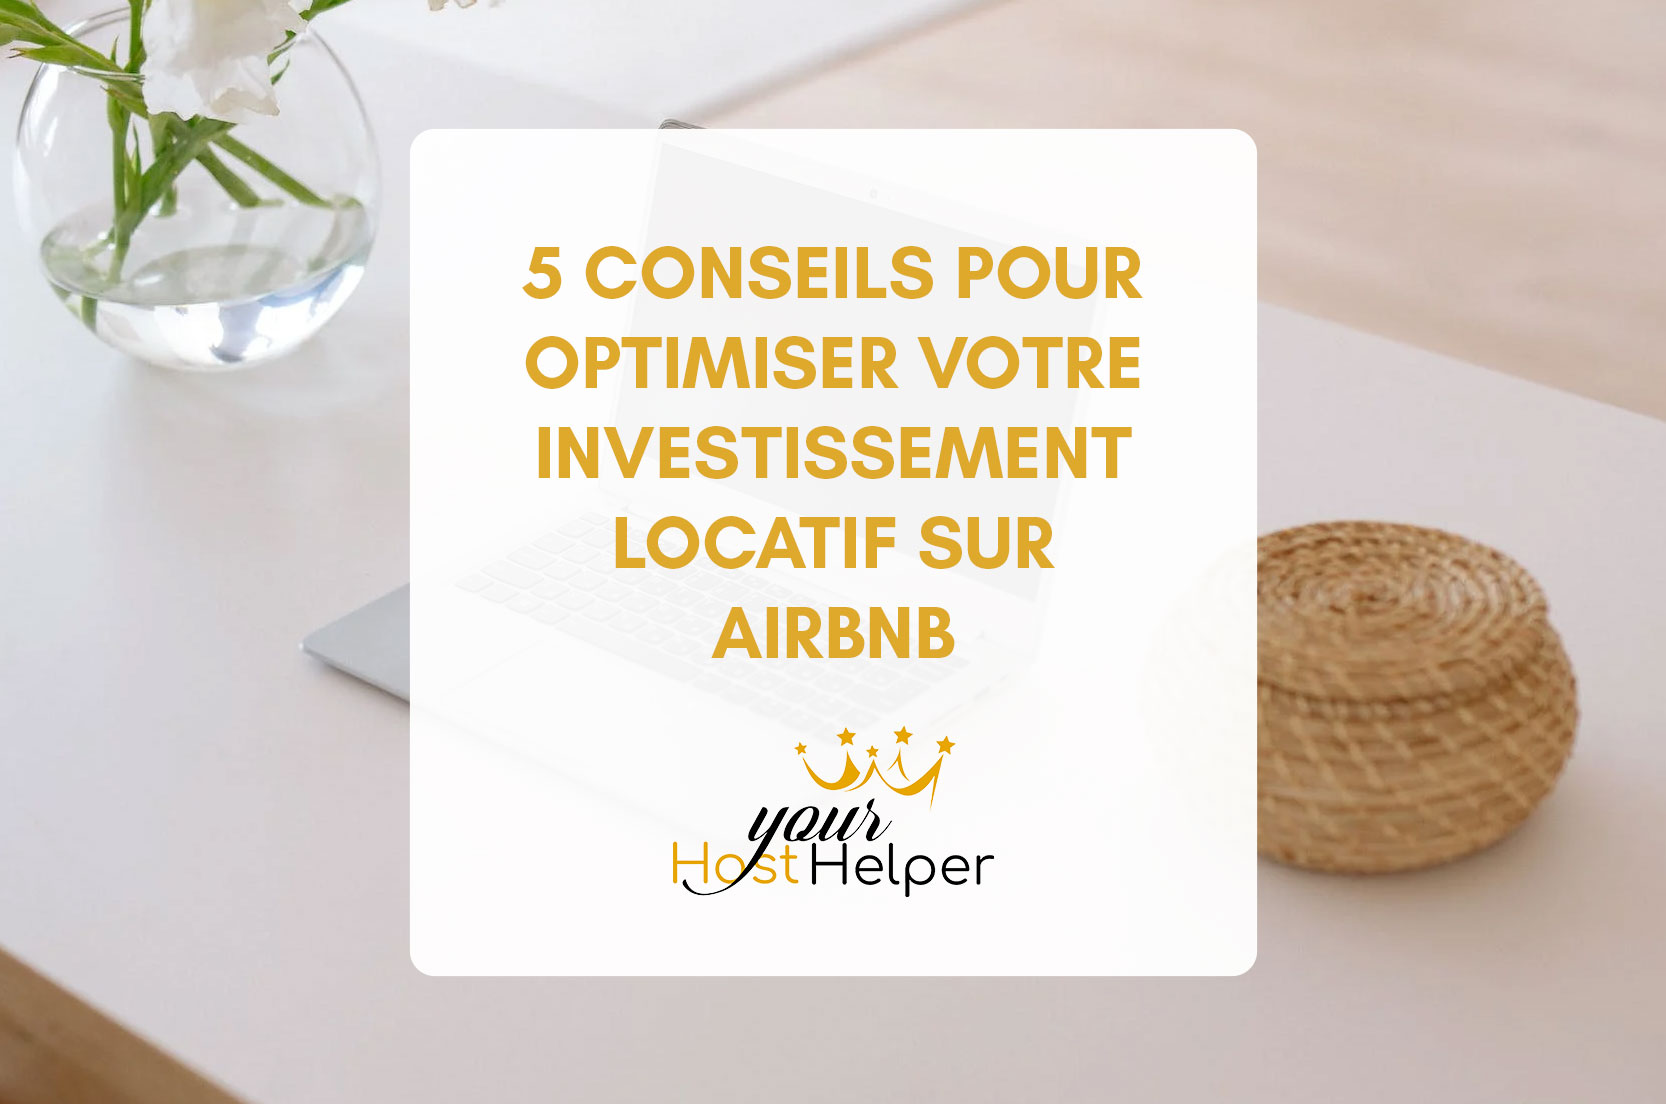 You are currently viewing 5 Conseils pour optimiser votre investissement locatif Airbnb